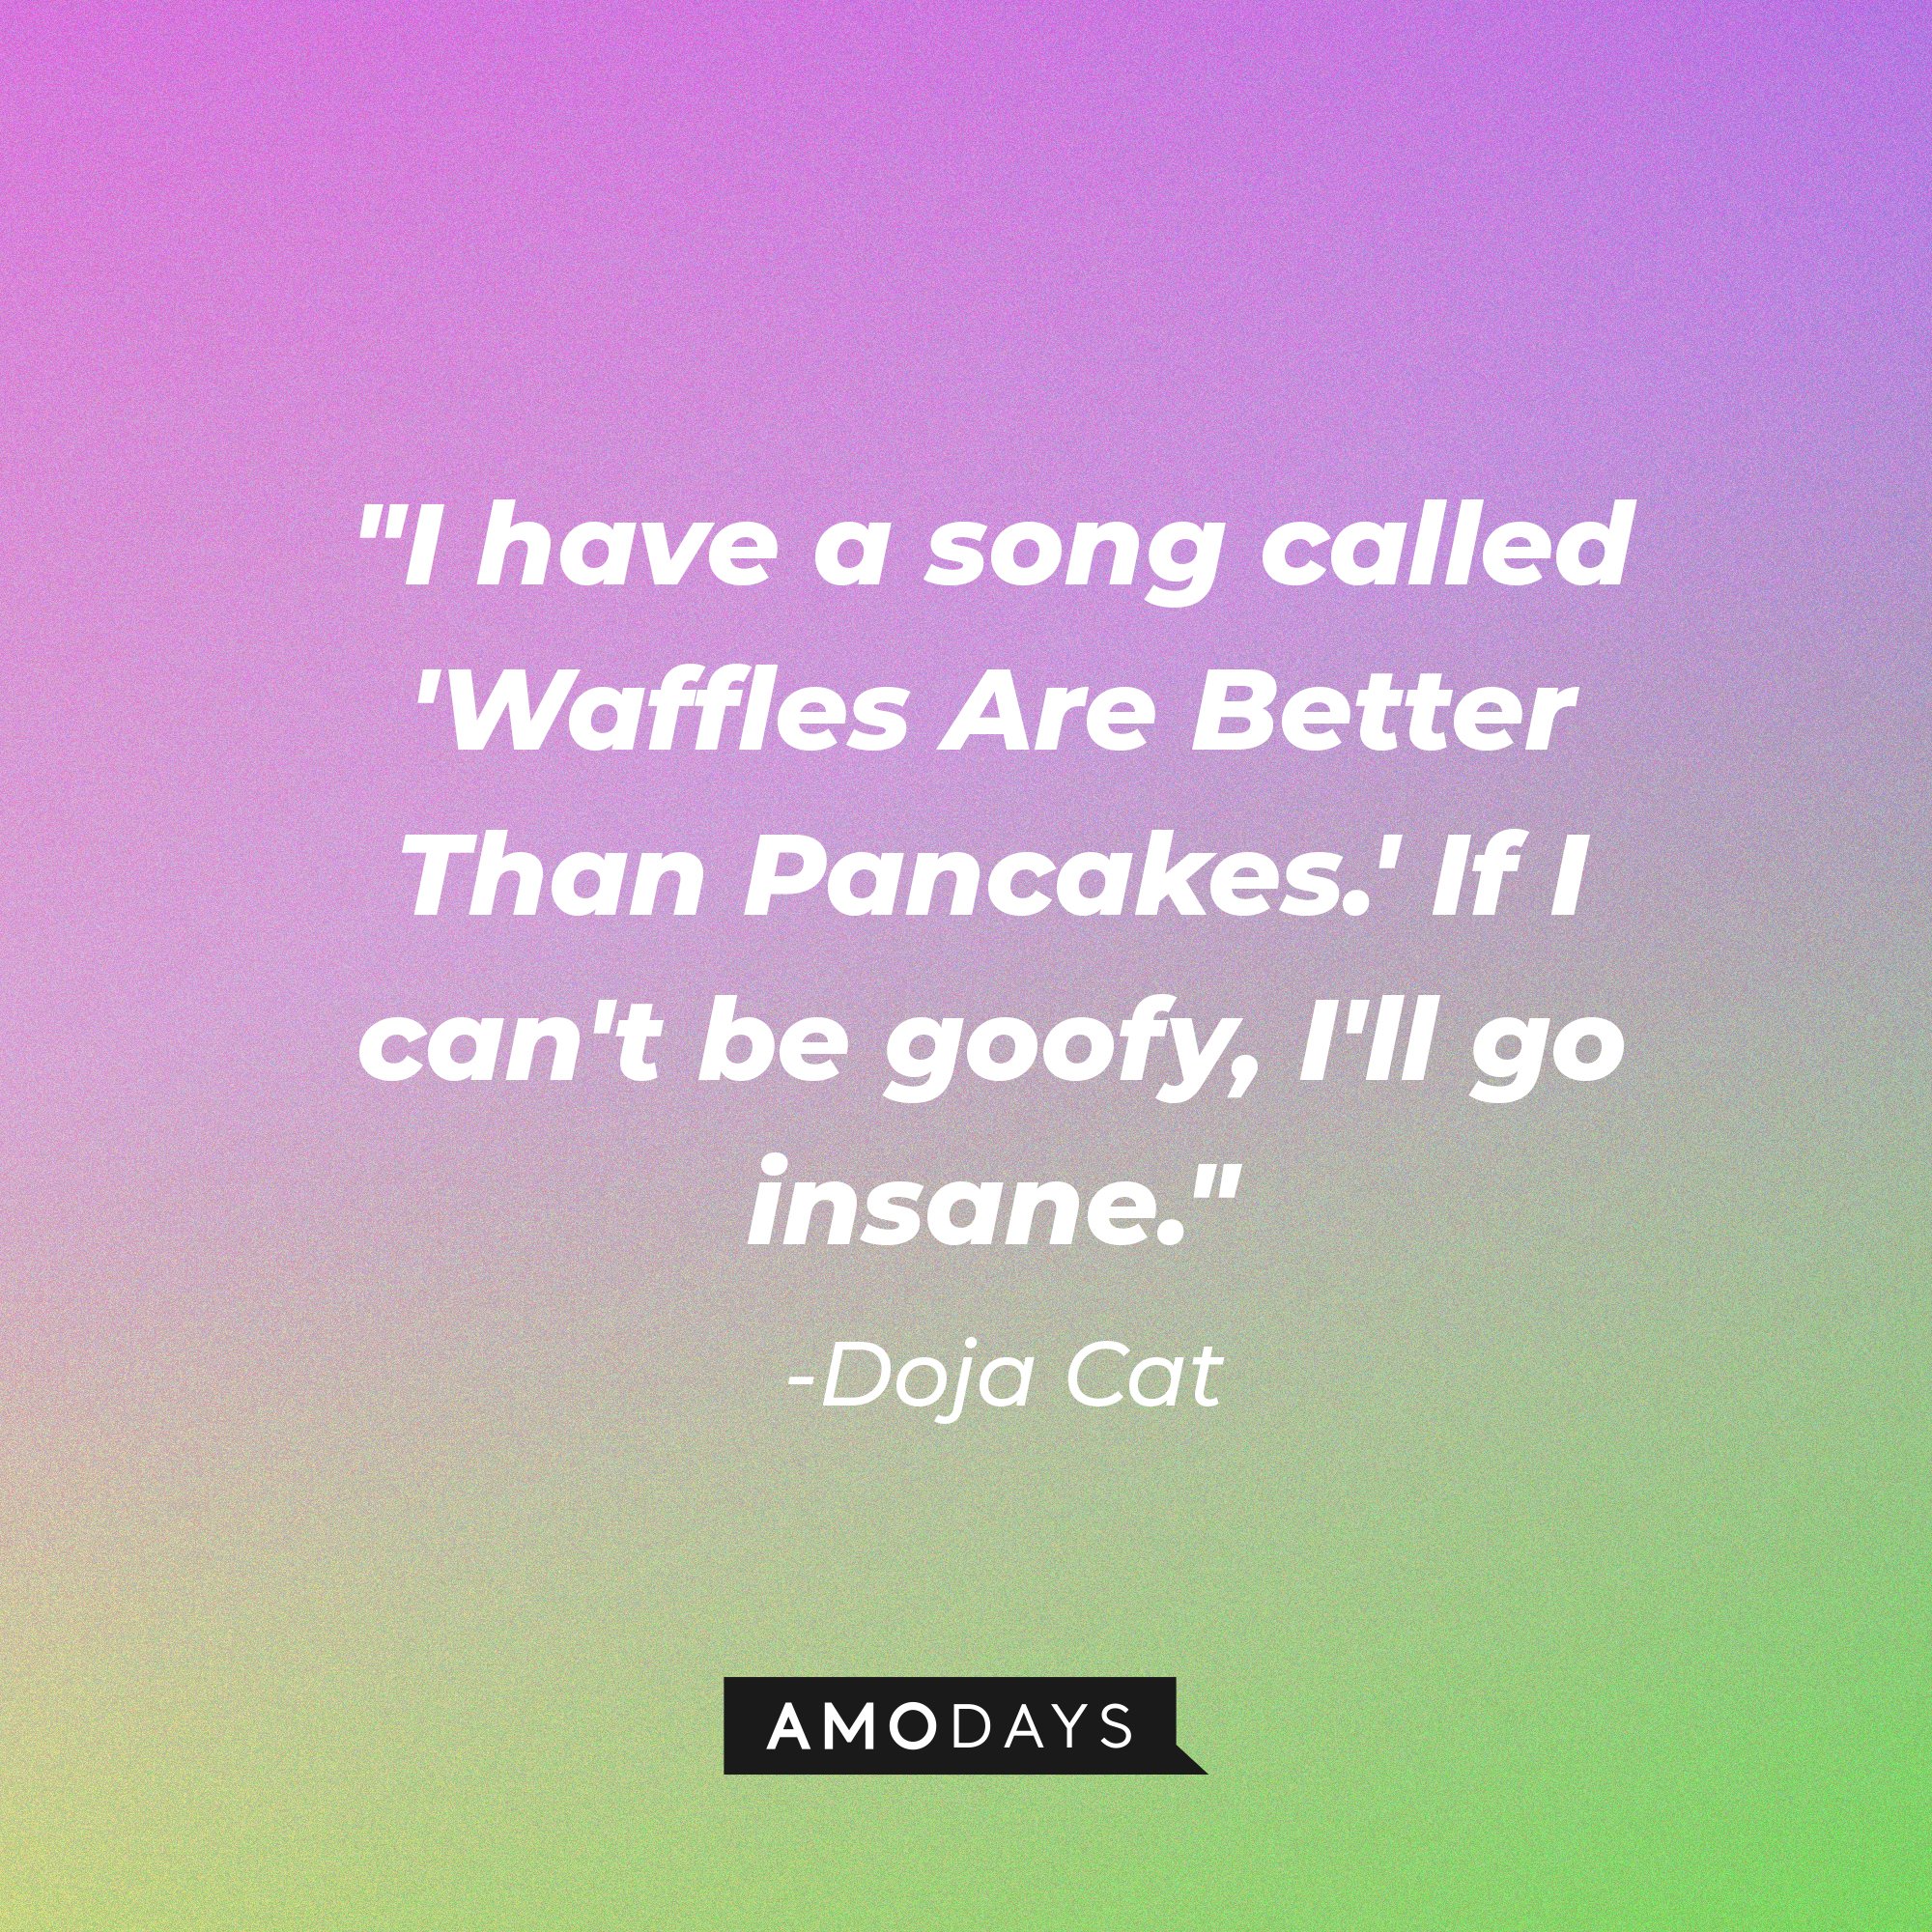 Doja Cat's quote: "I have a song called 'Waffles Are Better Than Pancakes.' If I can't be goofy, I'll go insane." | Image: AmoDays